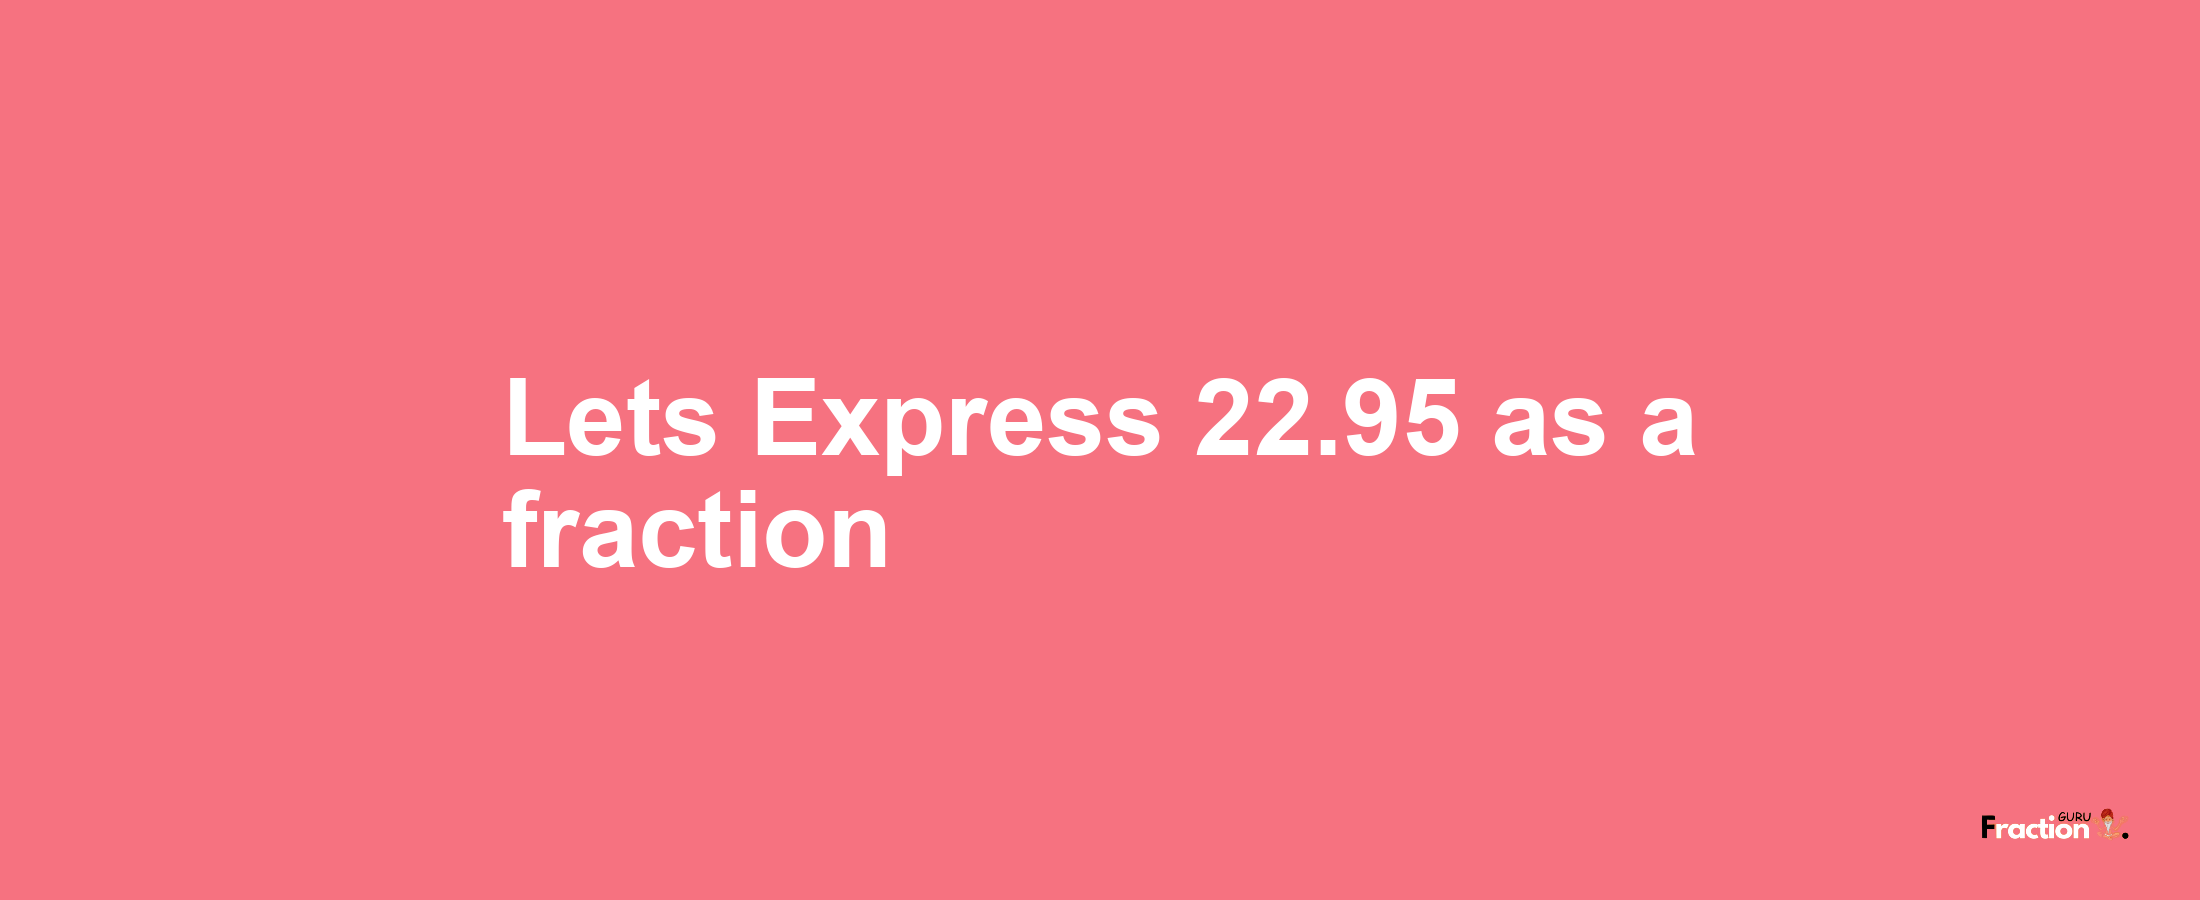 Lets Express 22.95 as afraction